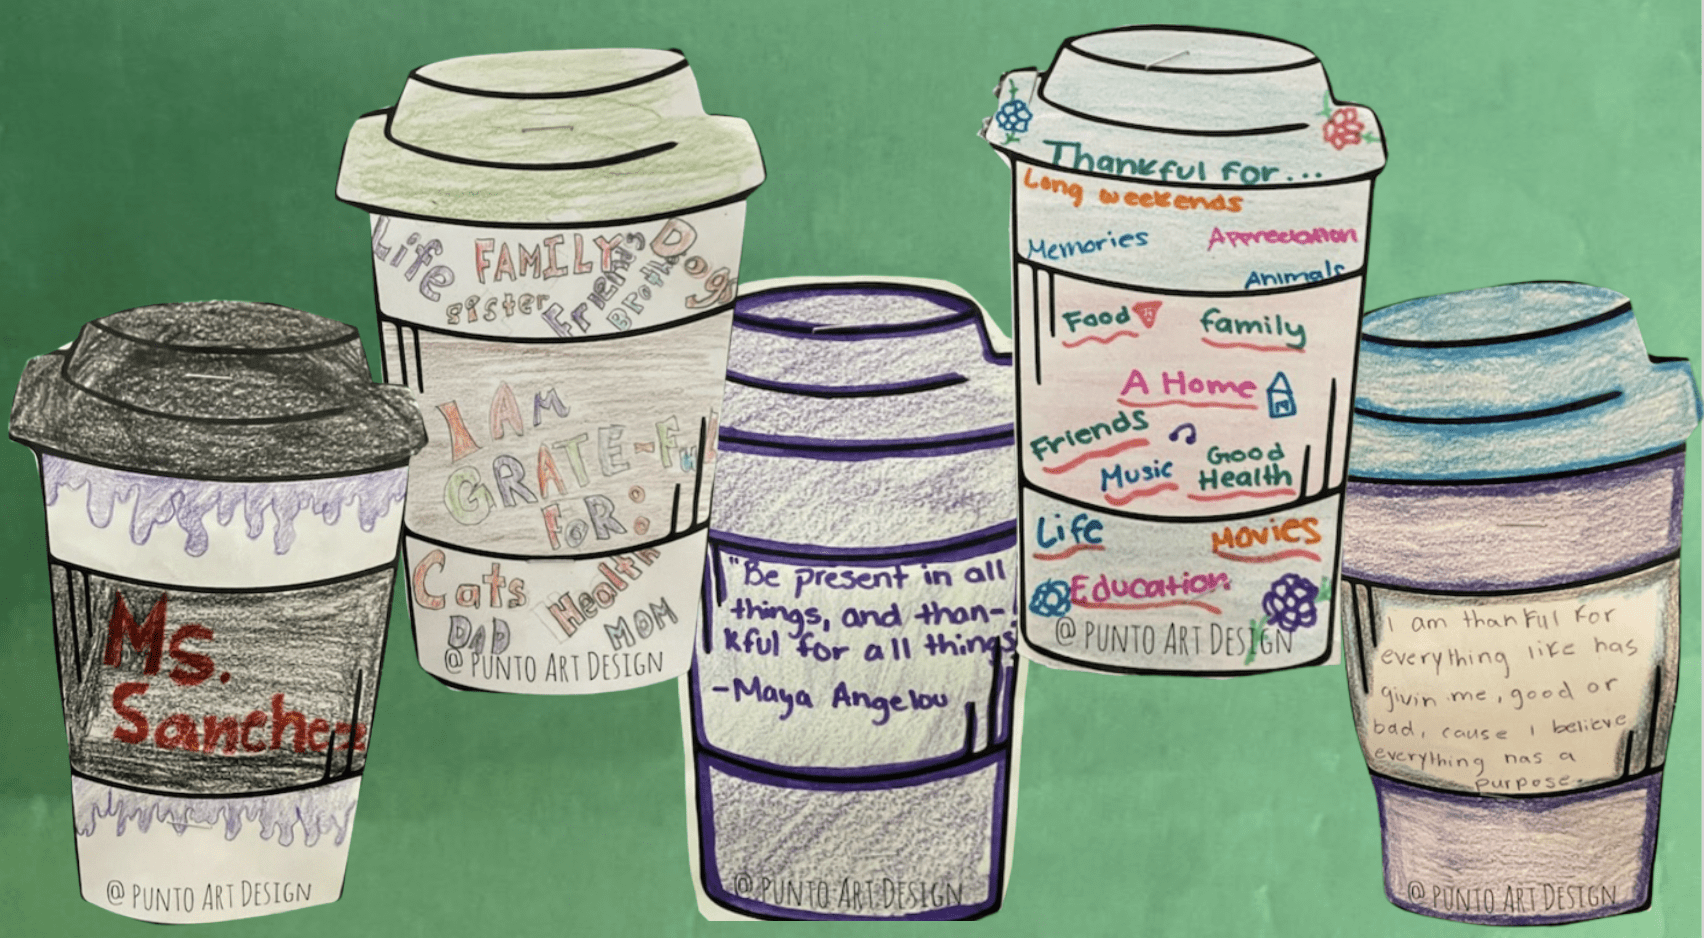 Image shows 5 paper drawings of latte cups on a green bulletin board. Inside each cup, there is text where Muchin College Prep students wrote down what they are thankful for such as "Music, friends, cats, parents, teachers, etc".